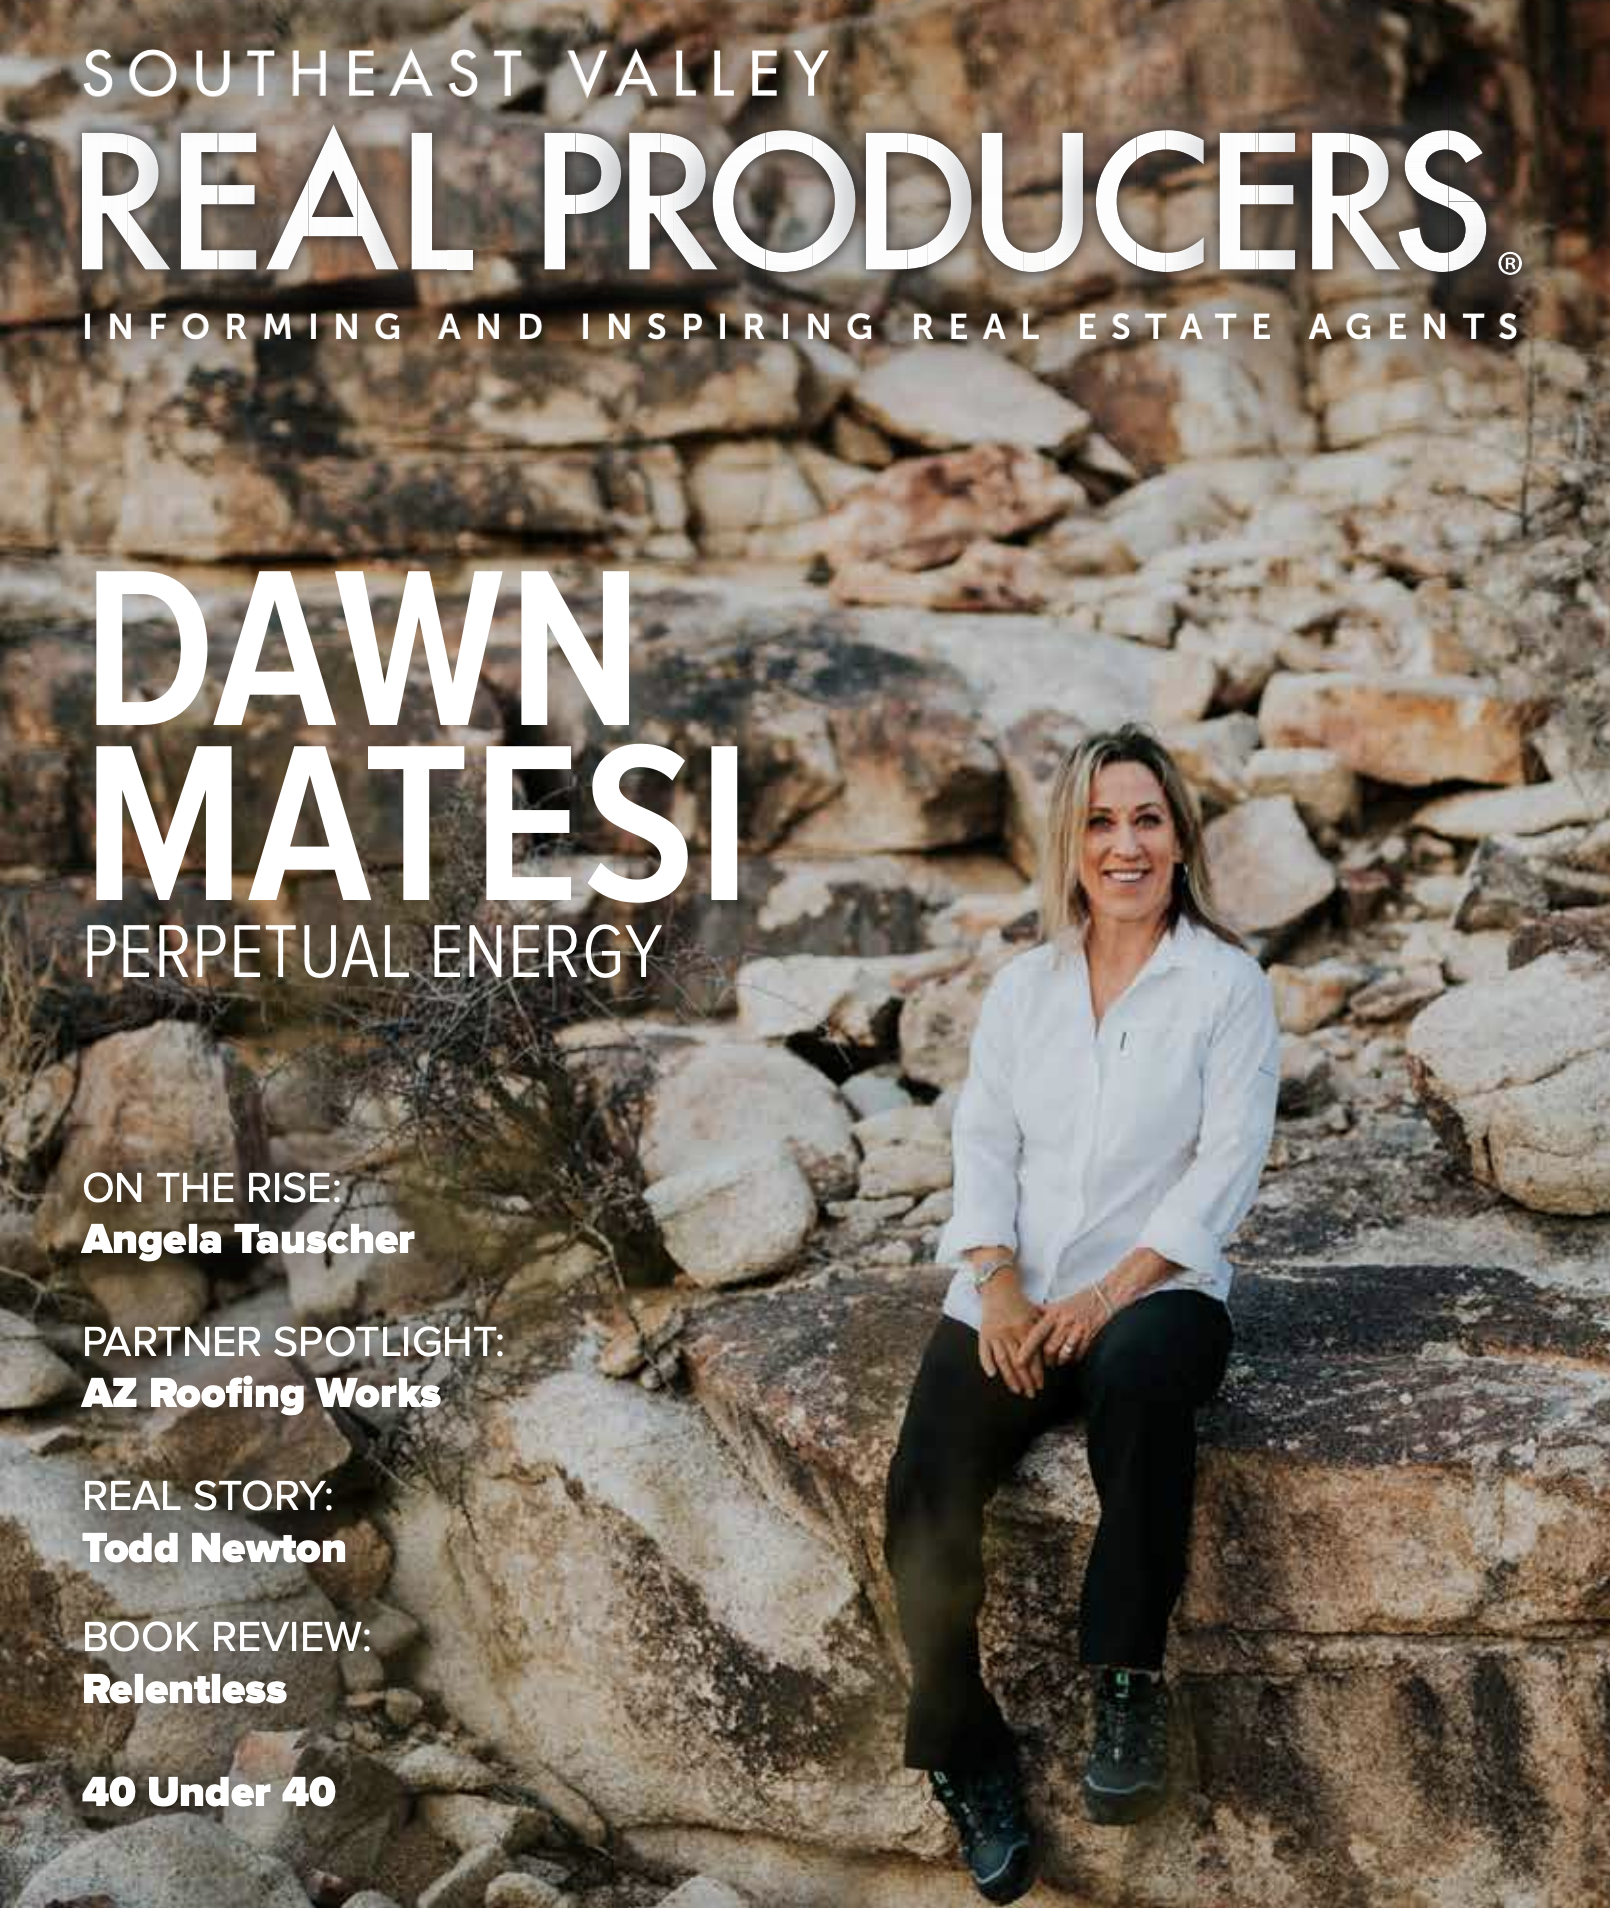 Russ in the Southeast Valley Real Producers Magazine